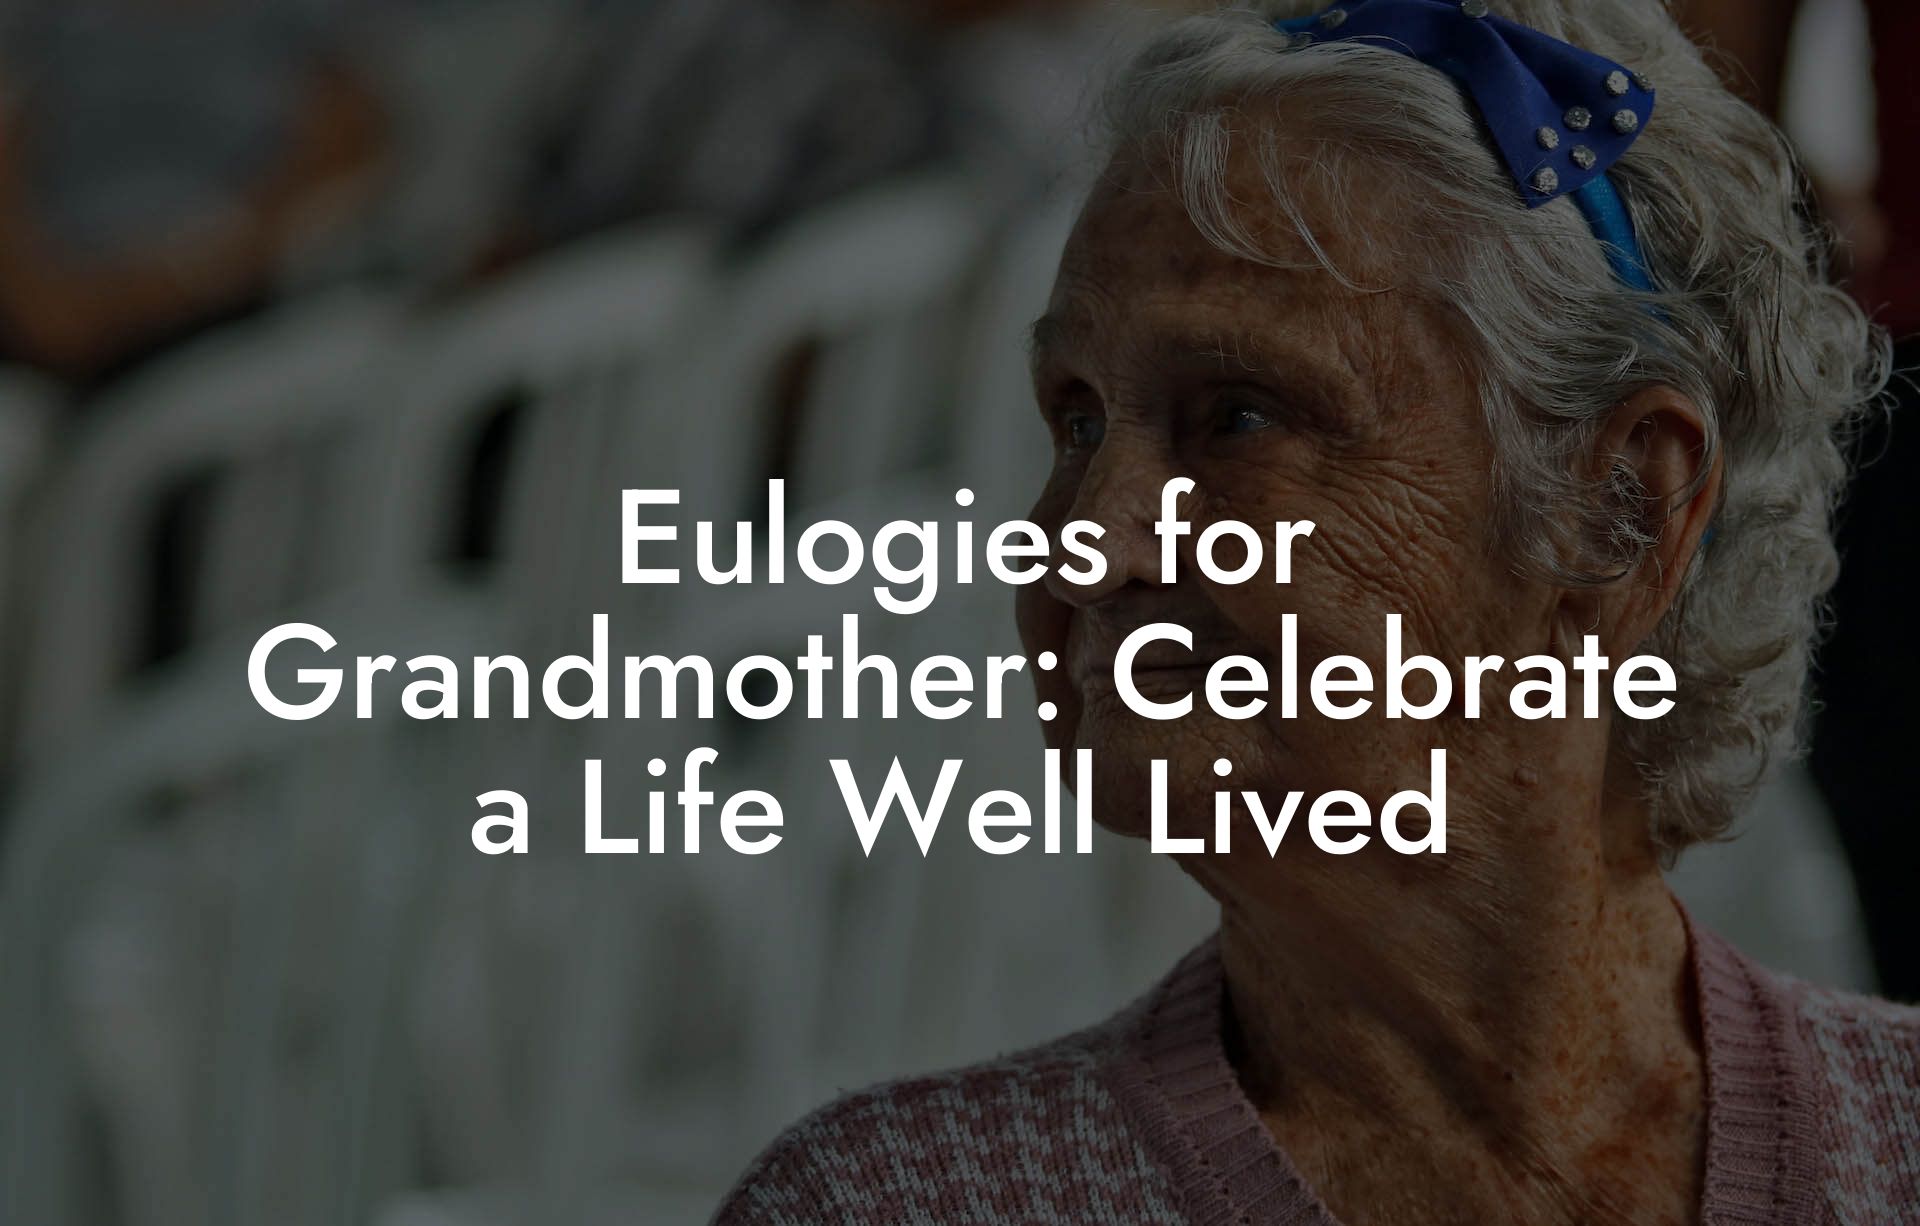 Eulogies for Grandmother: Celebrate a Life Well Lived